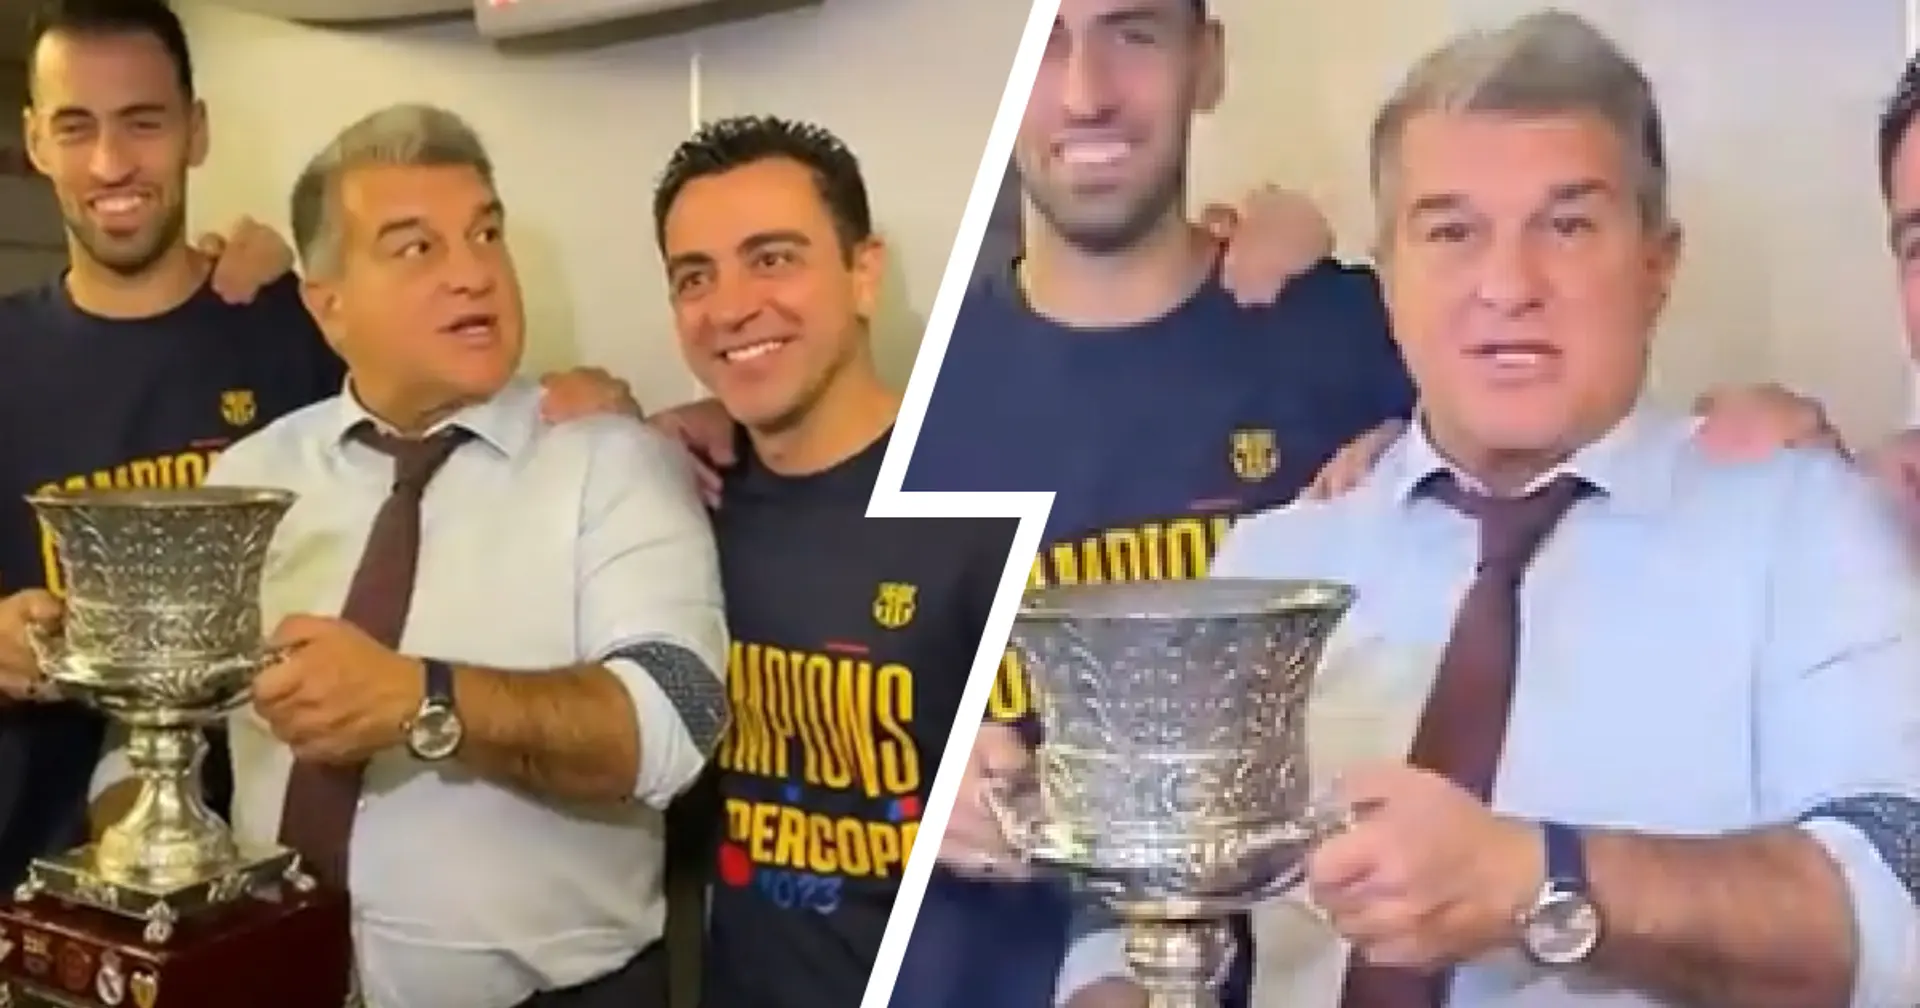 Laporta celebrates Supercopa victory with 4 Barca captains and Xavi -- spotted